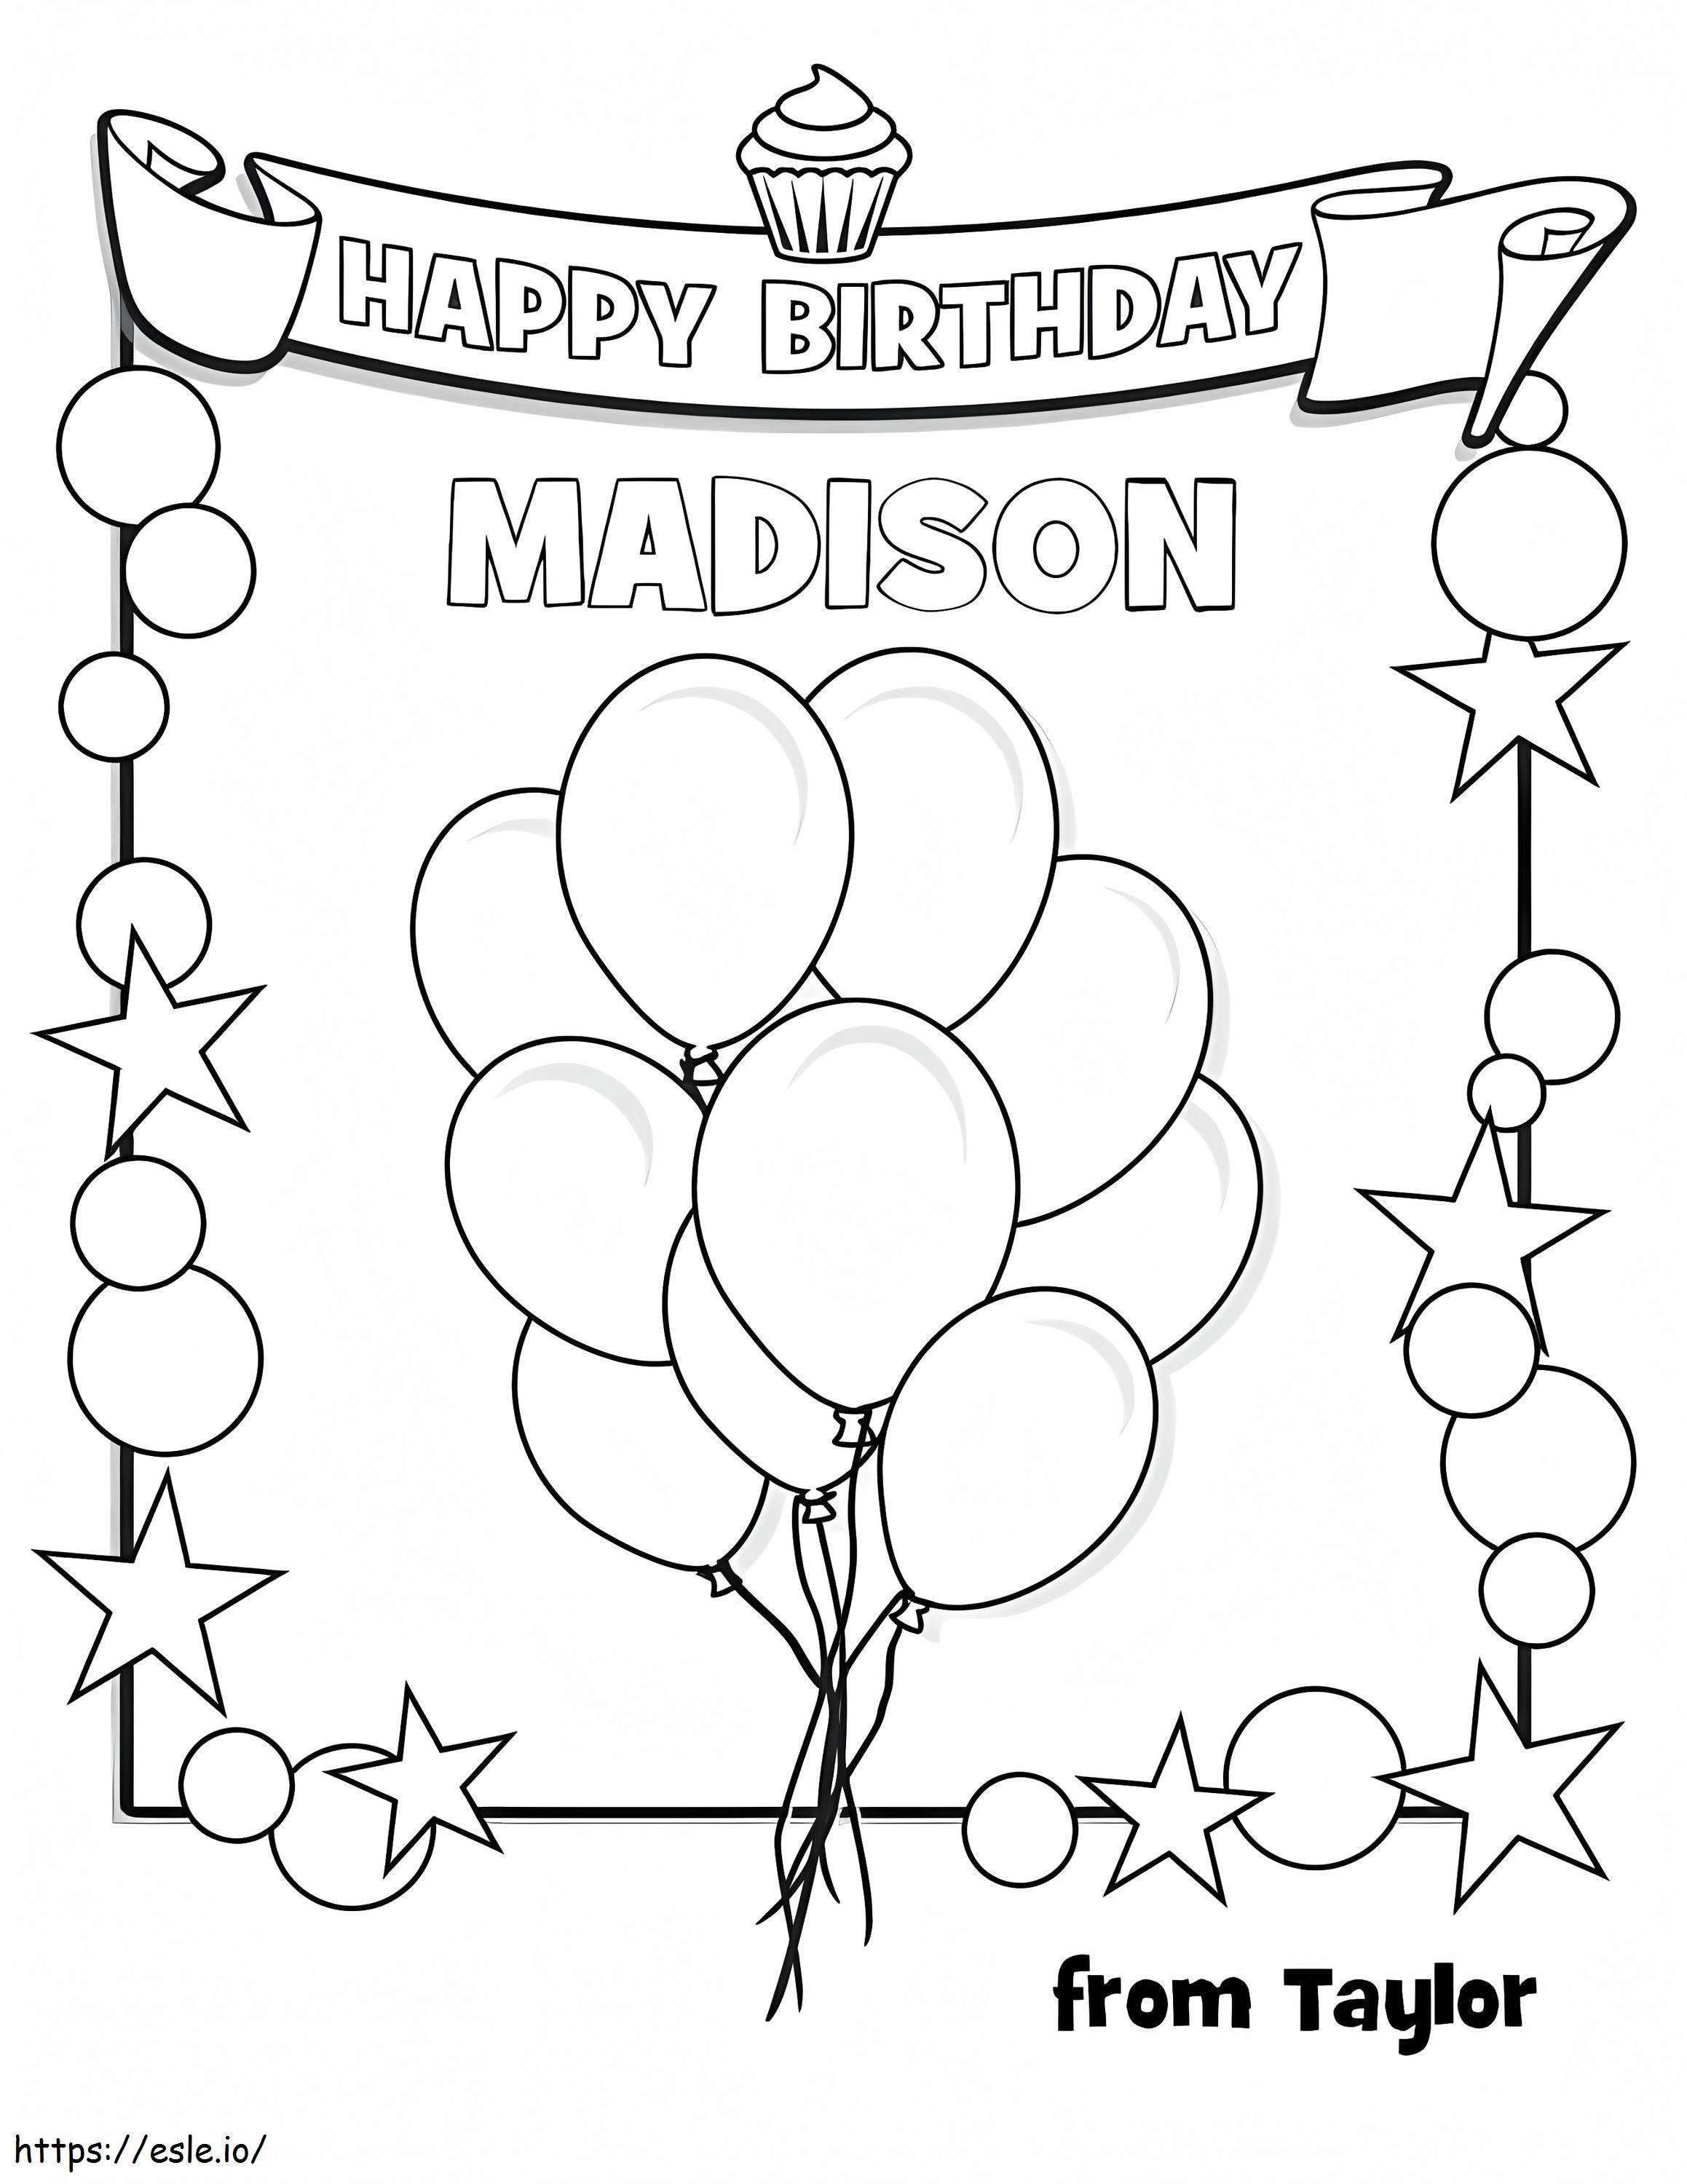 Happy Birthday Madison coloring page